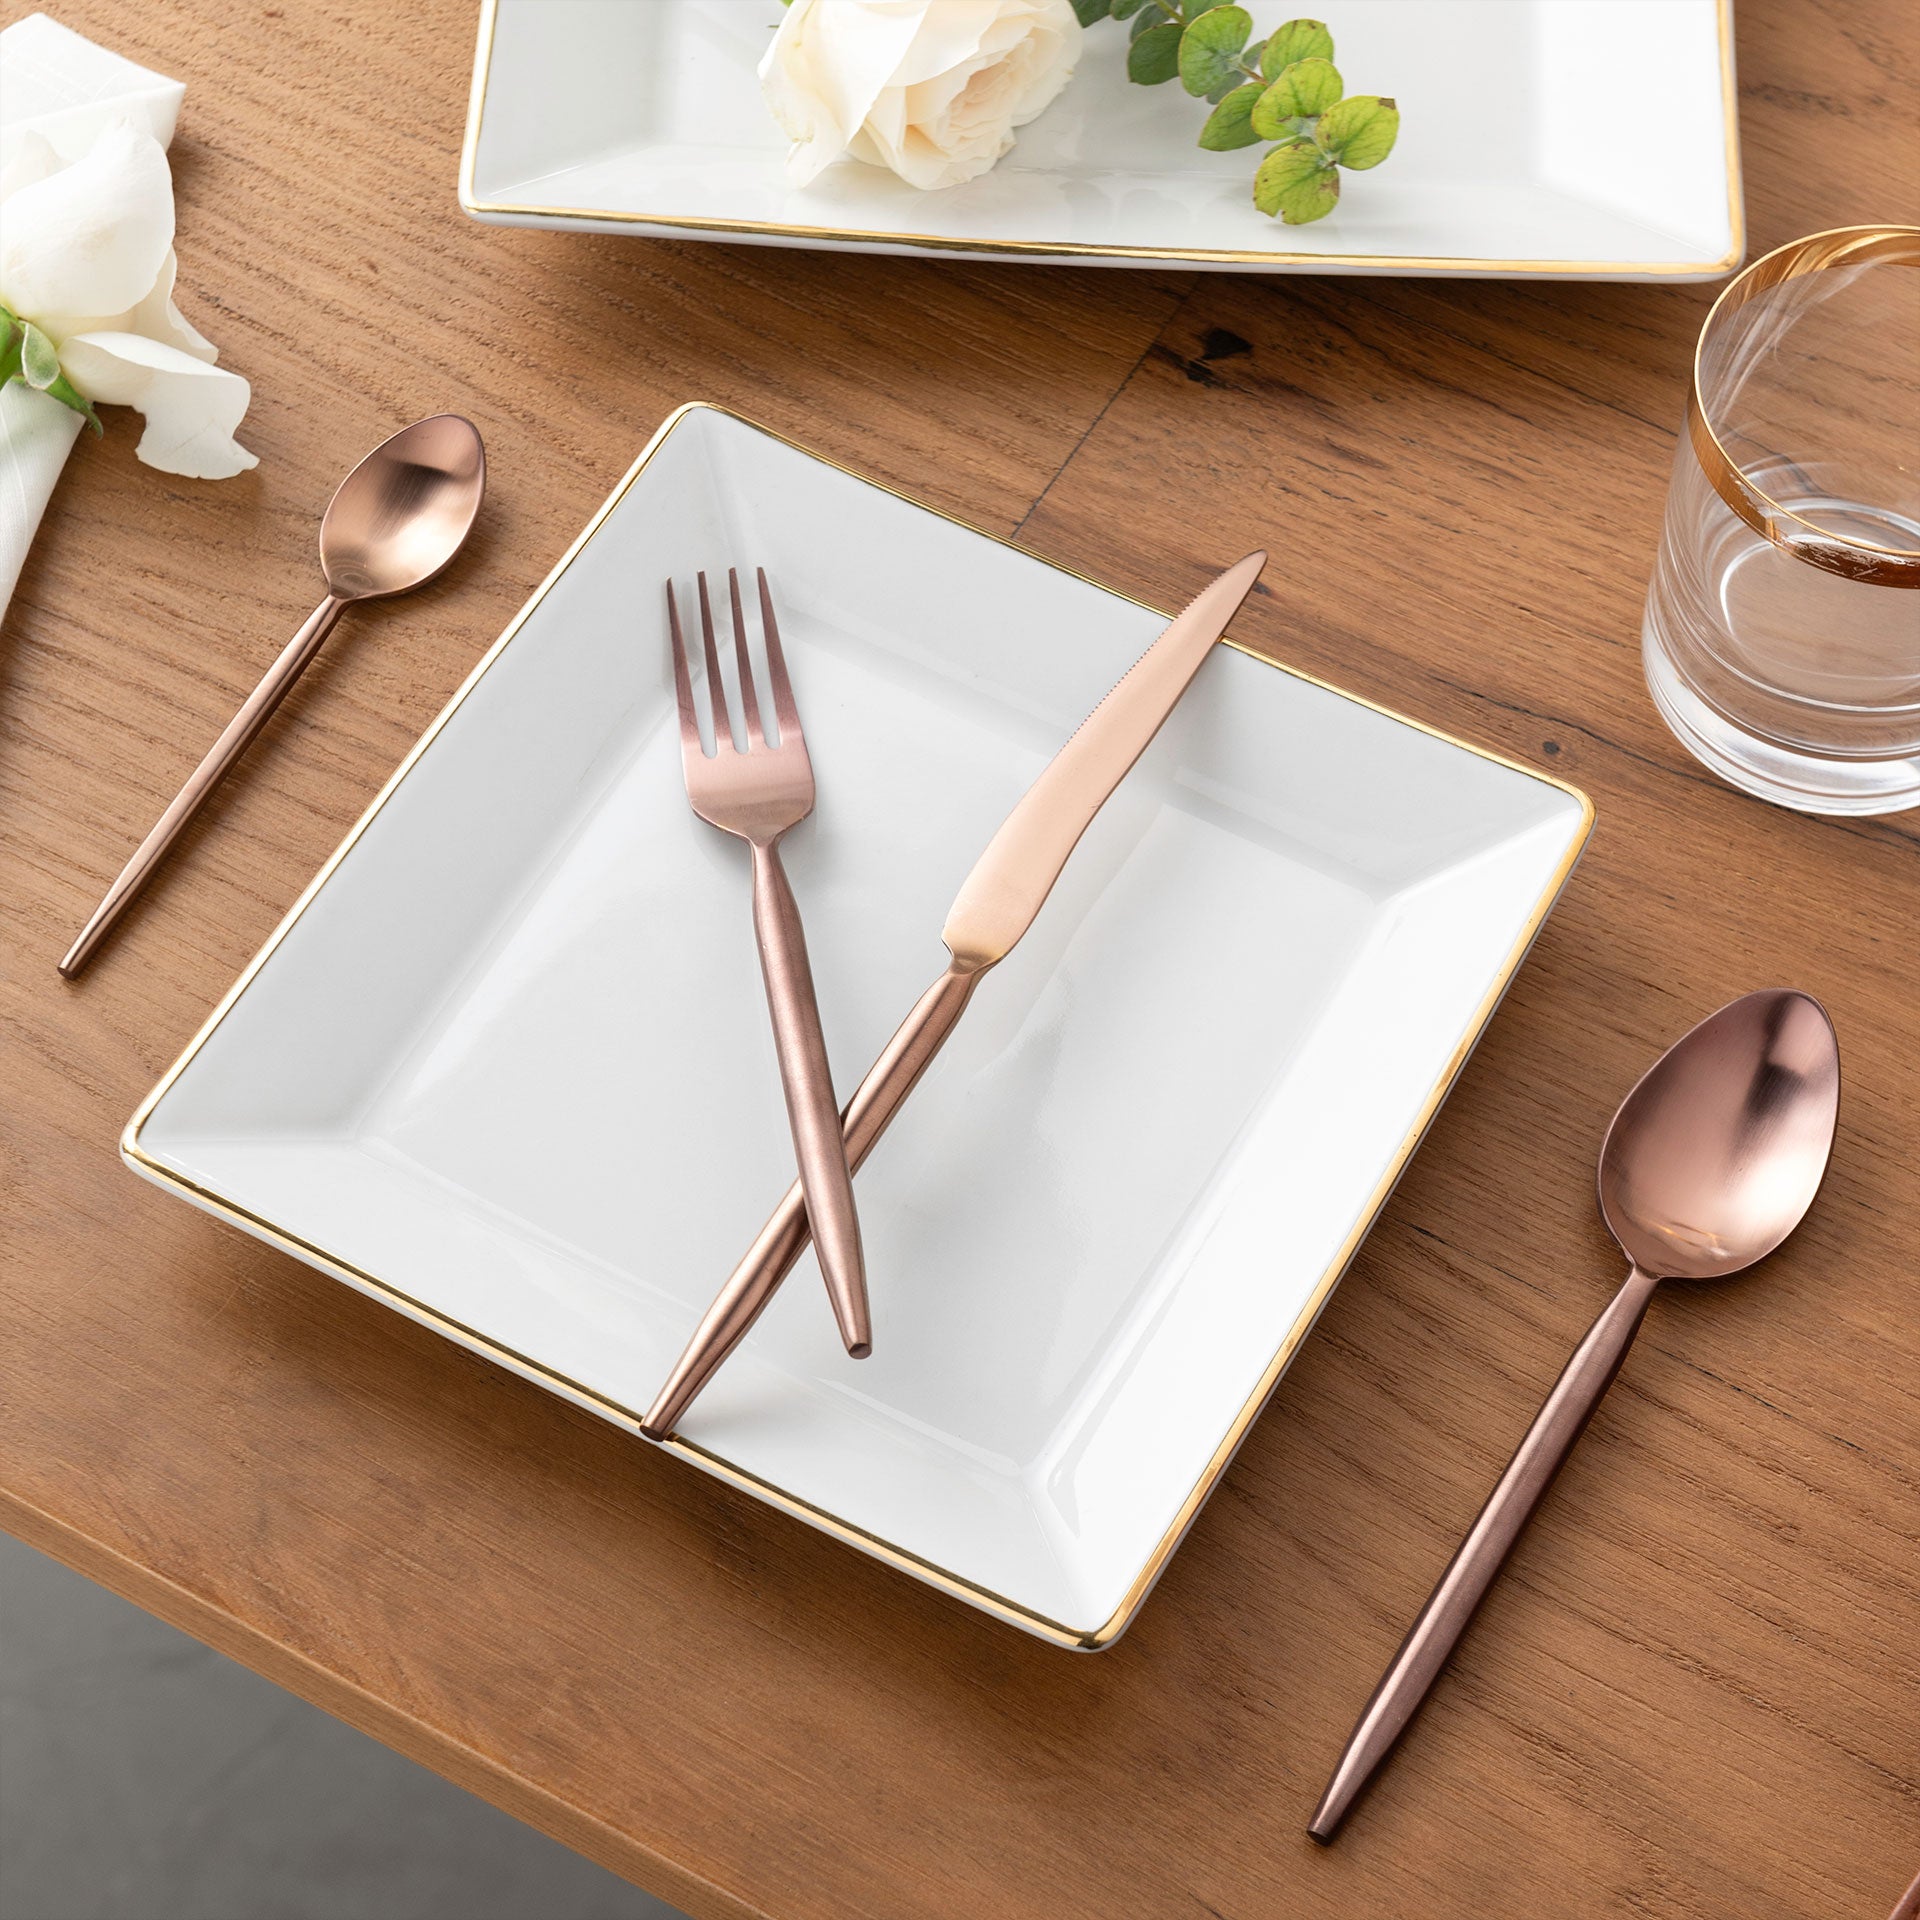 The Art of the Table: Elevate Your Dining Experience with Handcrafted Italian Cutlery